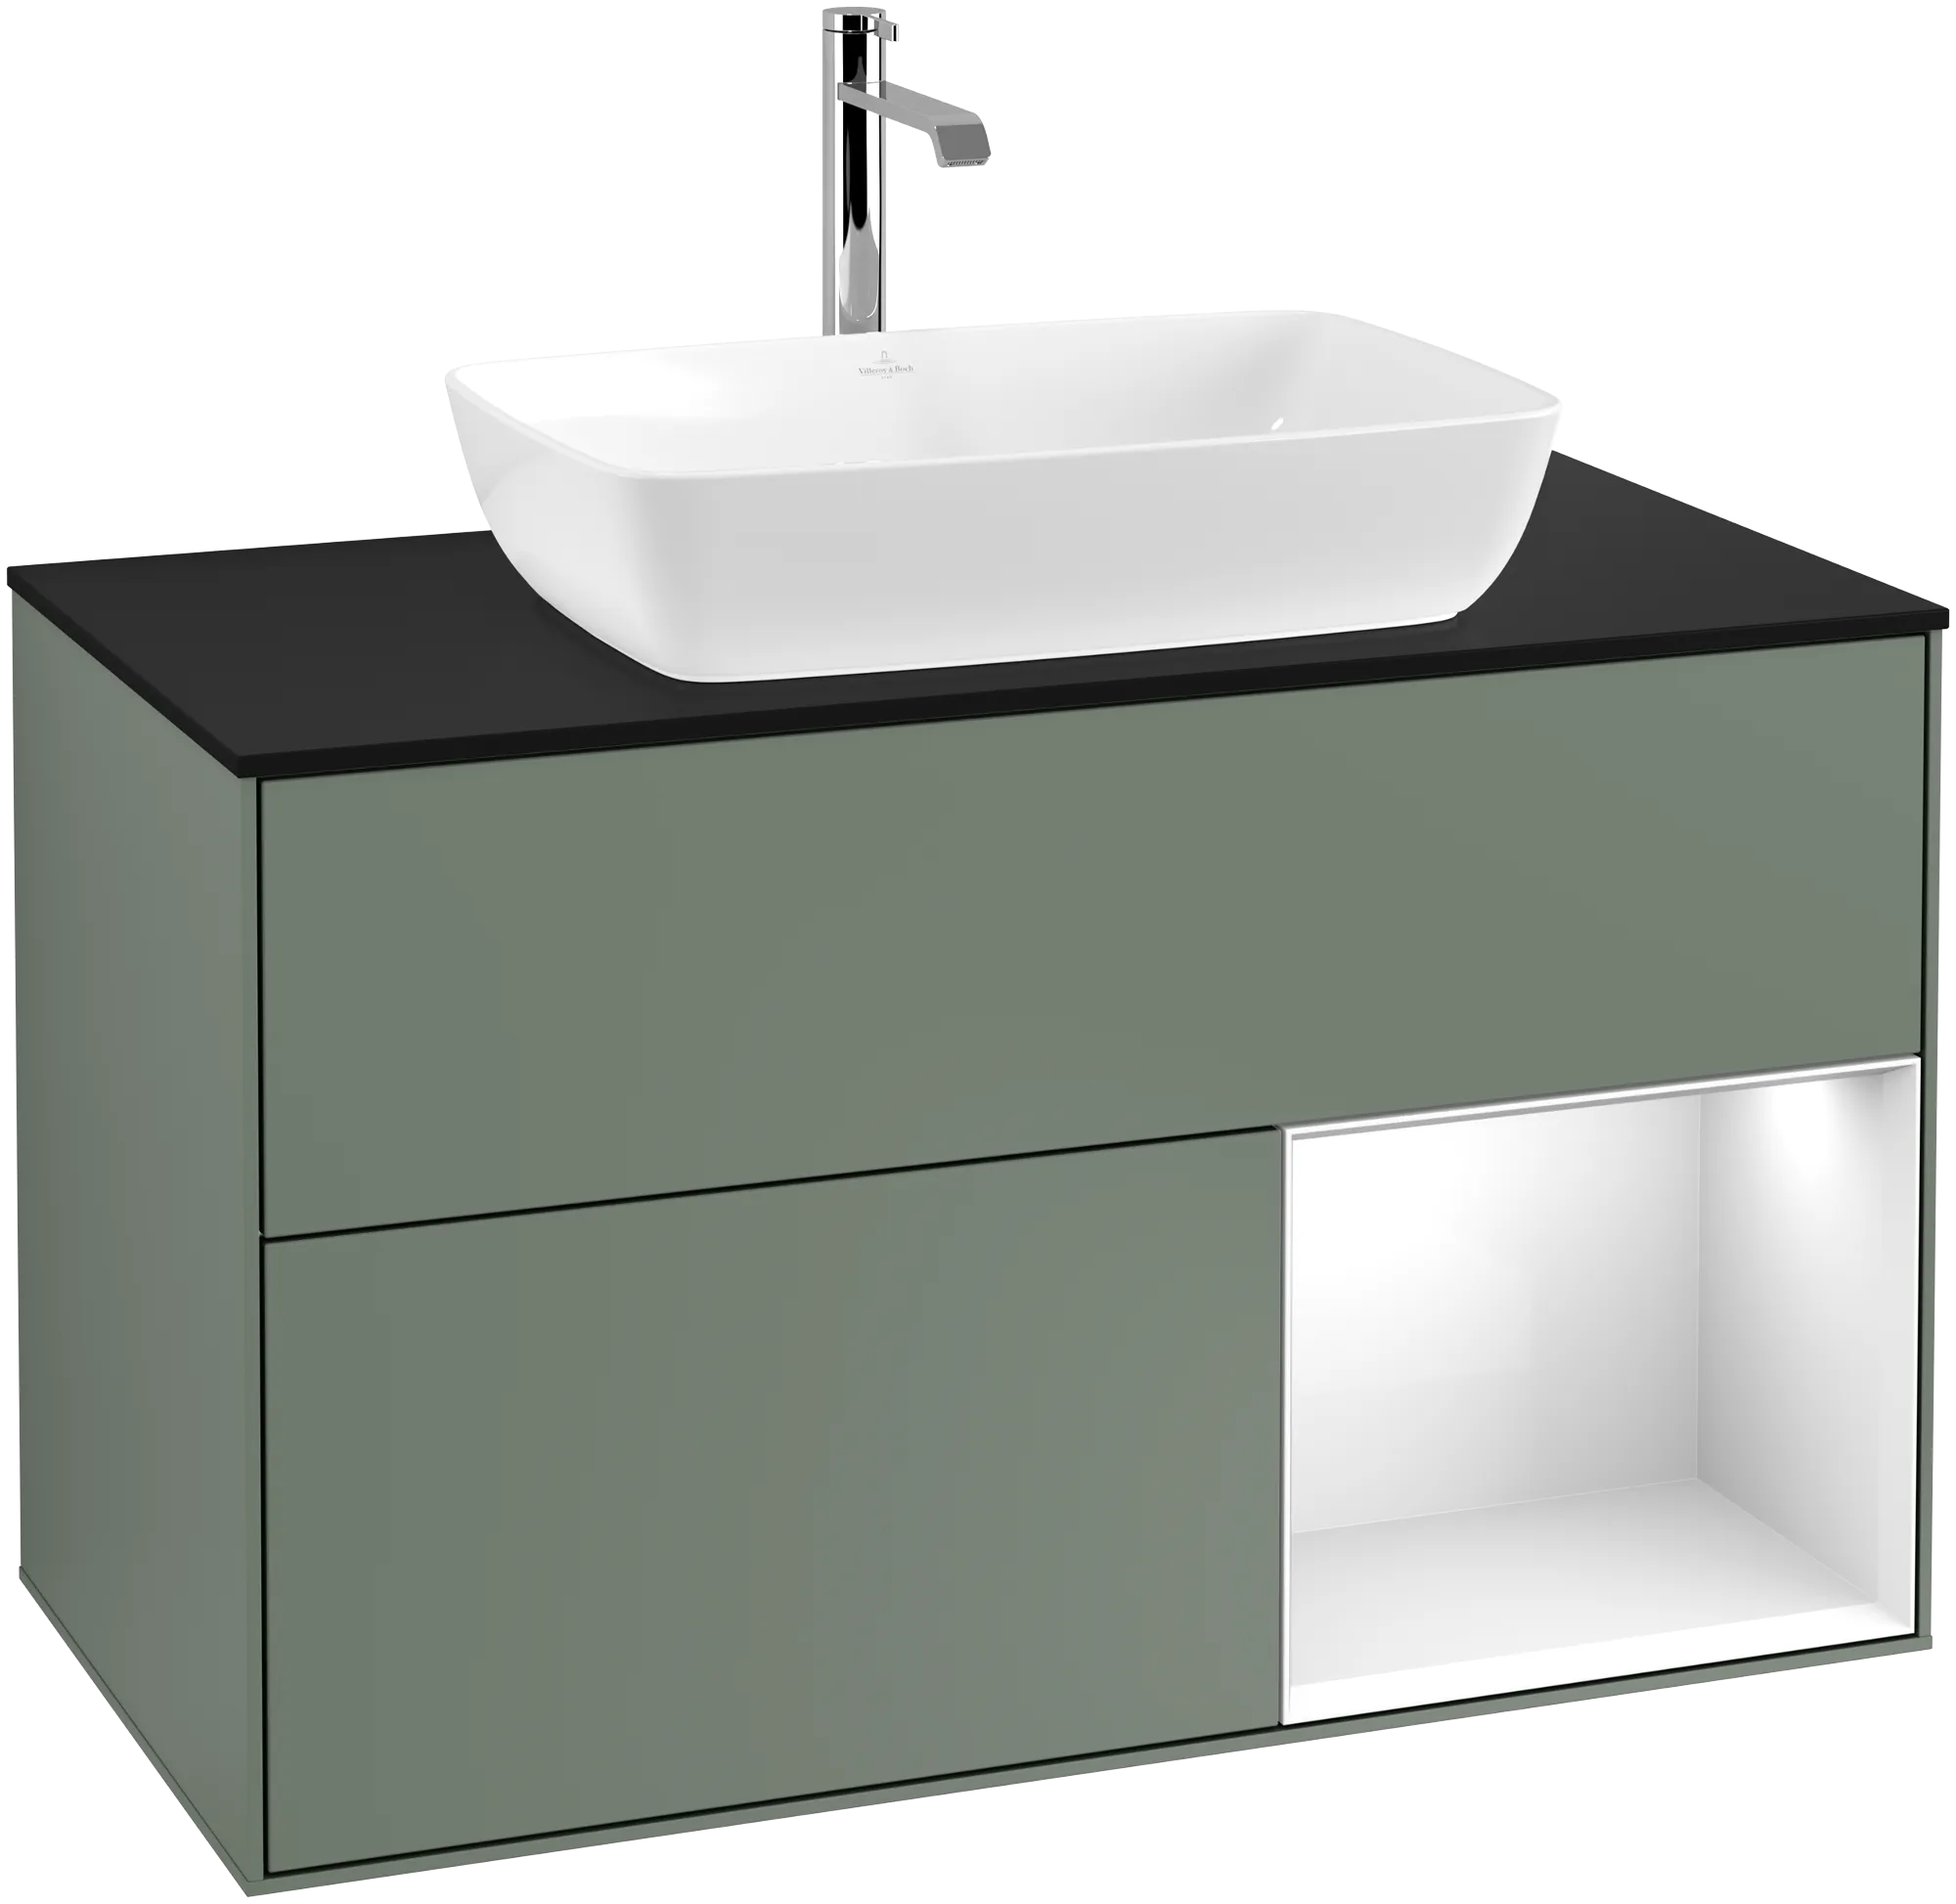 Picture of VILLEROY BOCH Finion Vanity unit, with lighting, 2 pull-out compartments, 1000 x 603 x 501 mm, Olive Matt Lacquer / Glossy White Lacquer / Glass Black Matt #G782GFGM